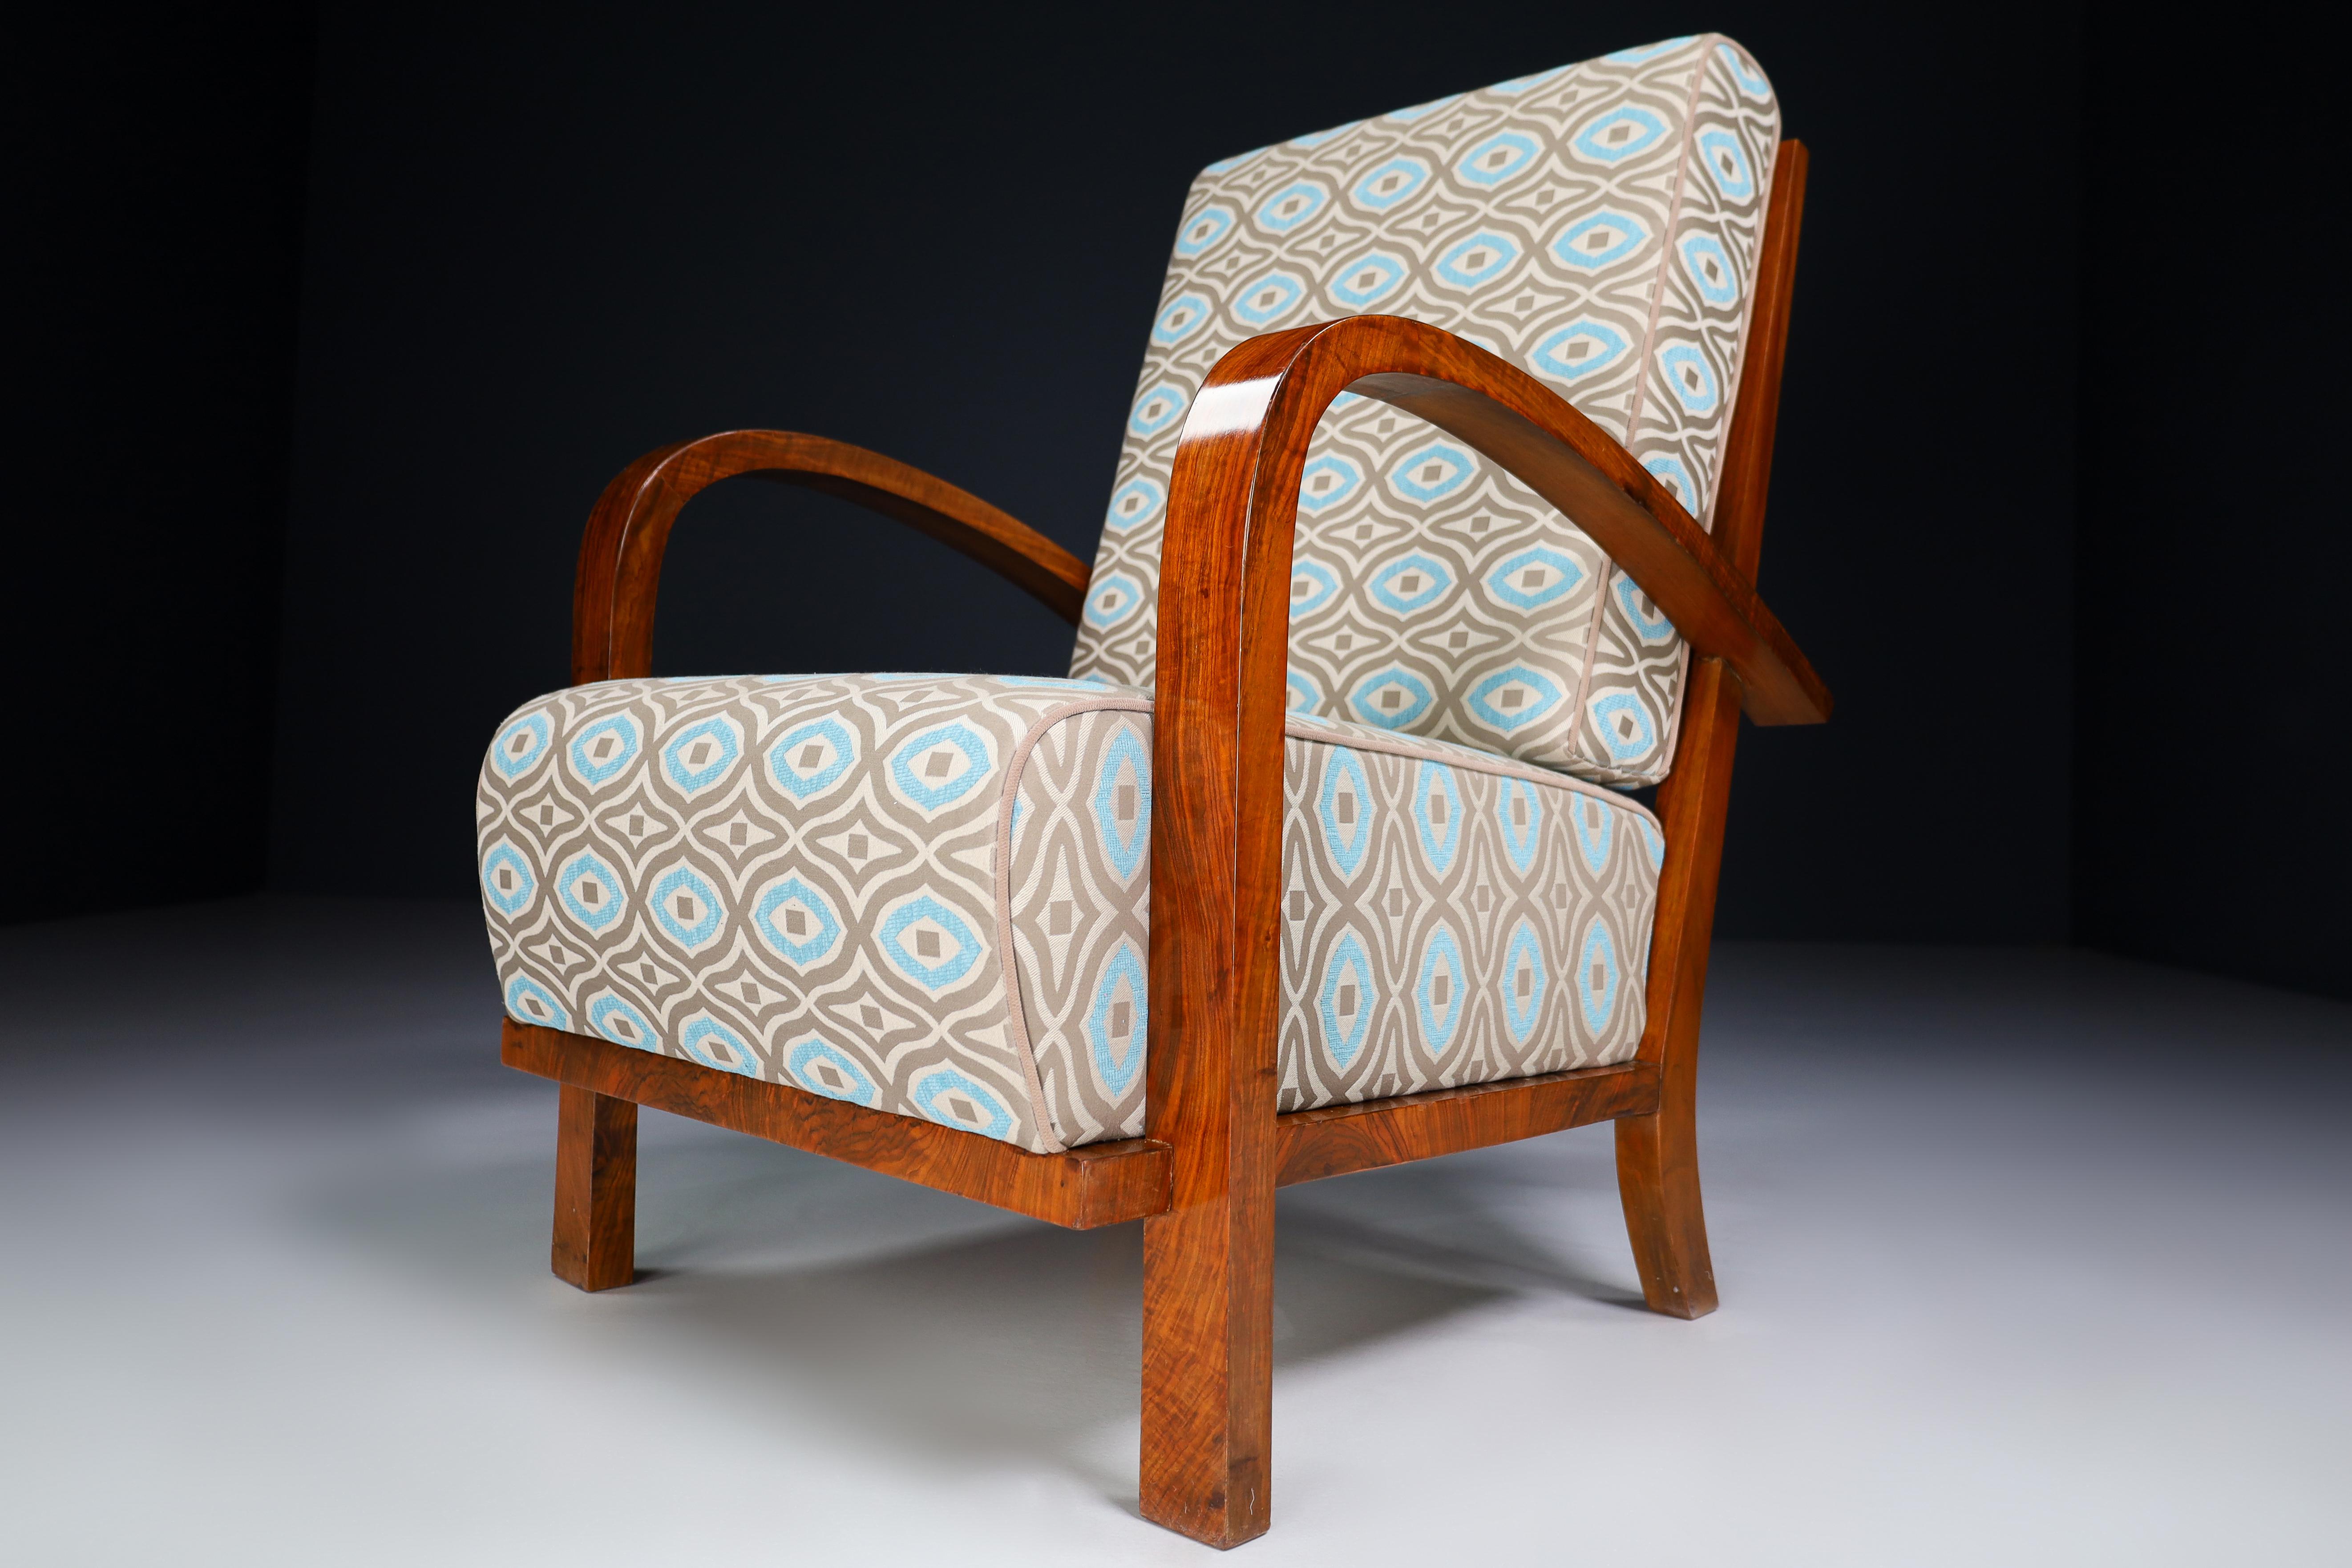 20th Century Art-Deco Walnut Armchairs in Reupholstered in Fabric, Praque, 1930s For Sale